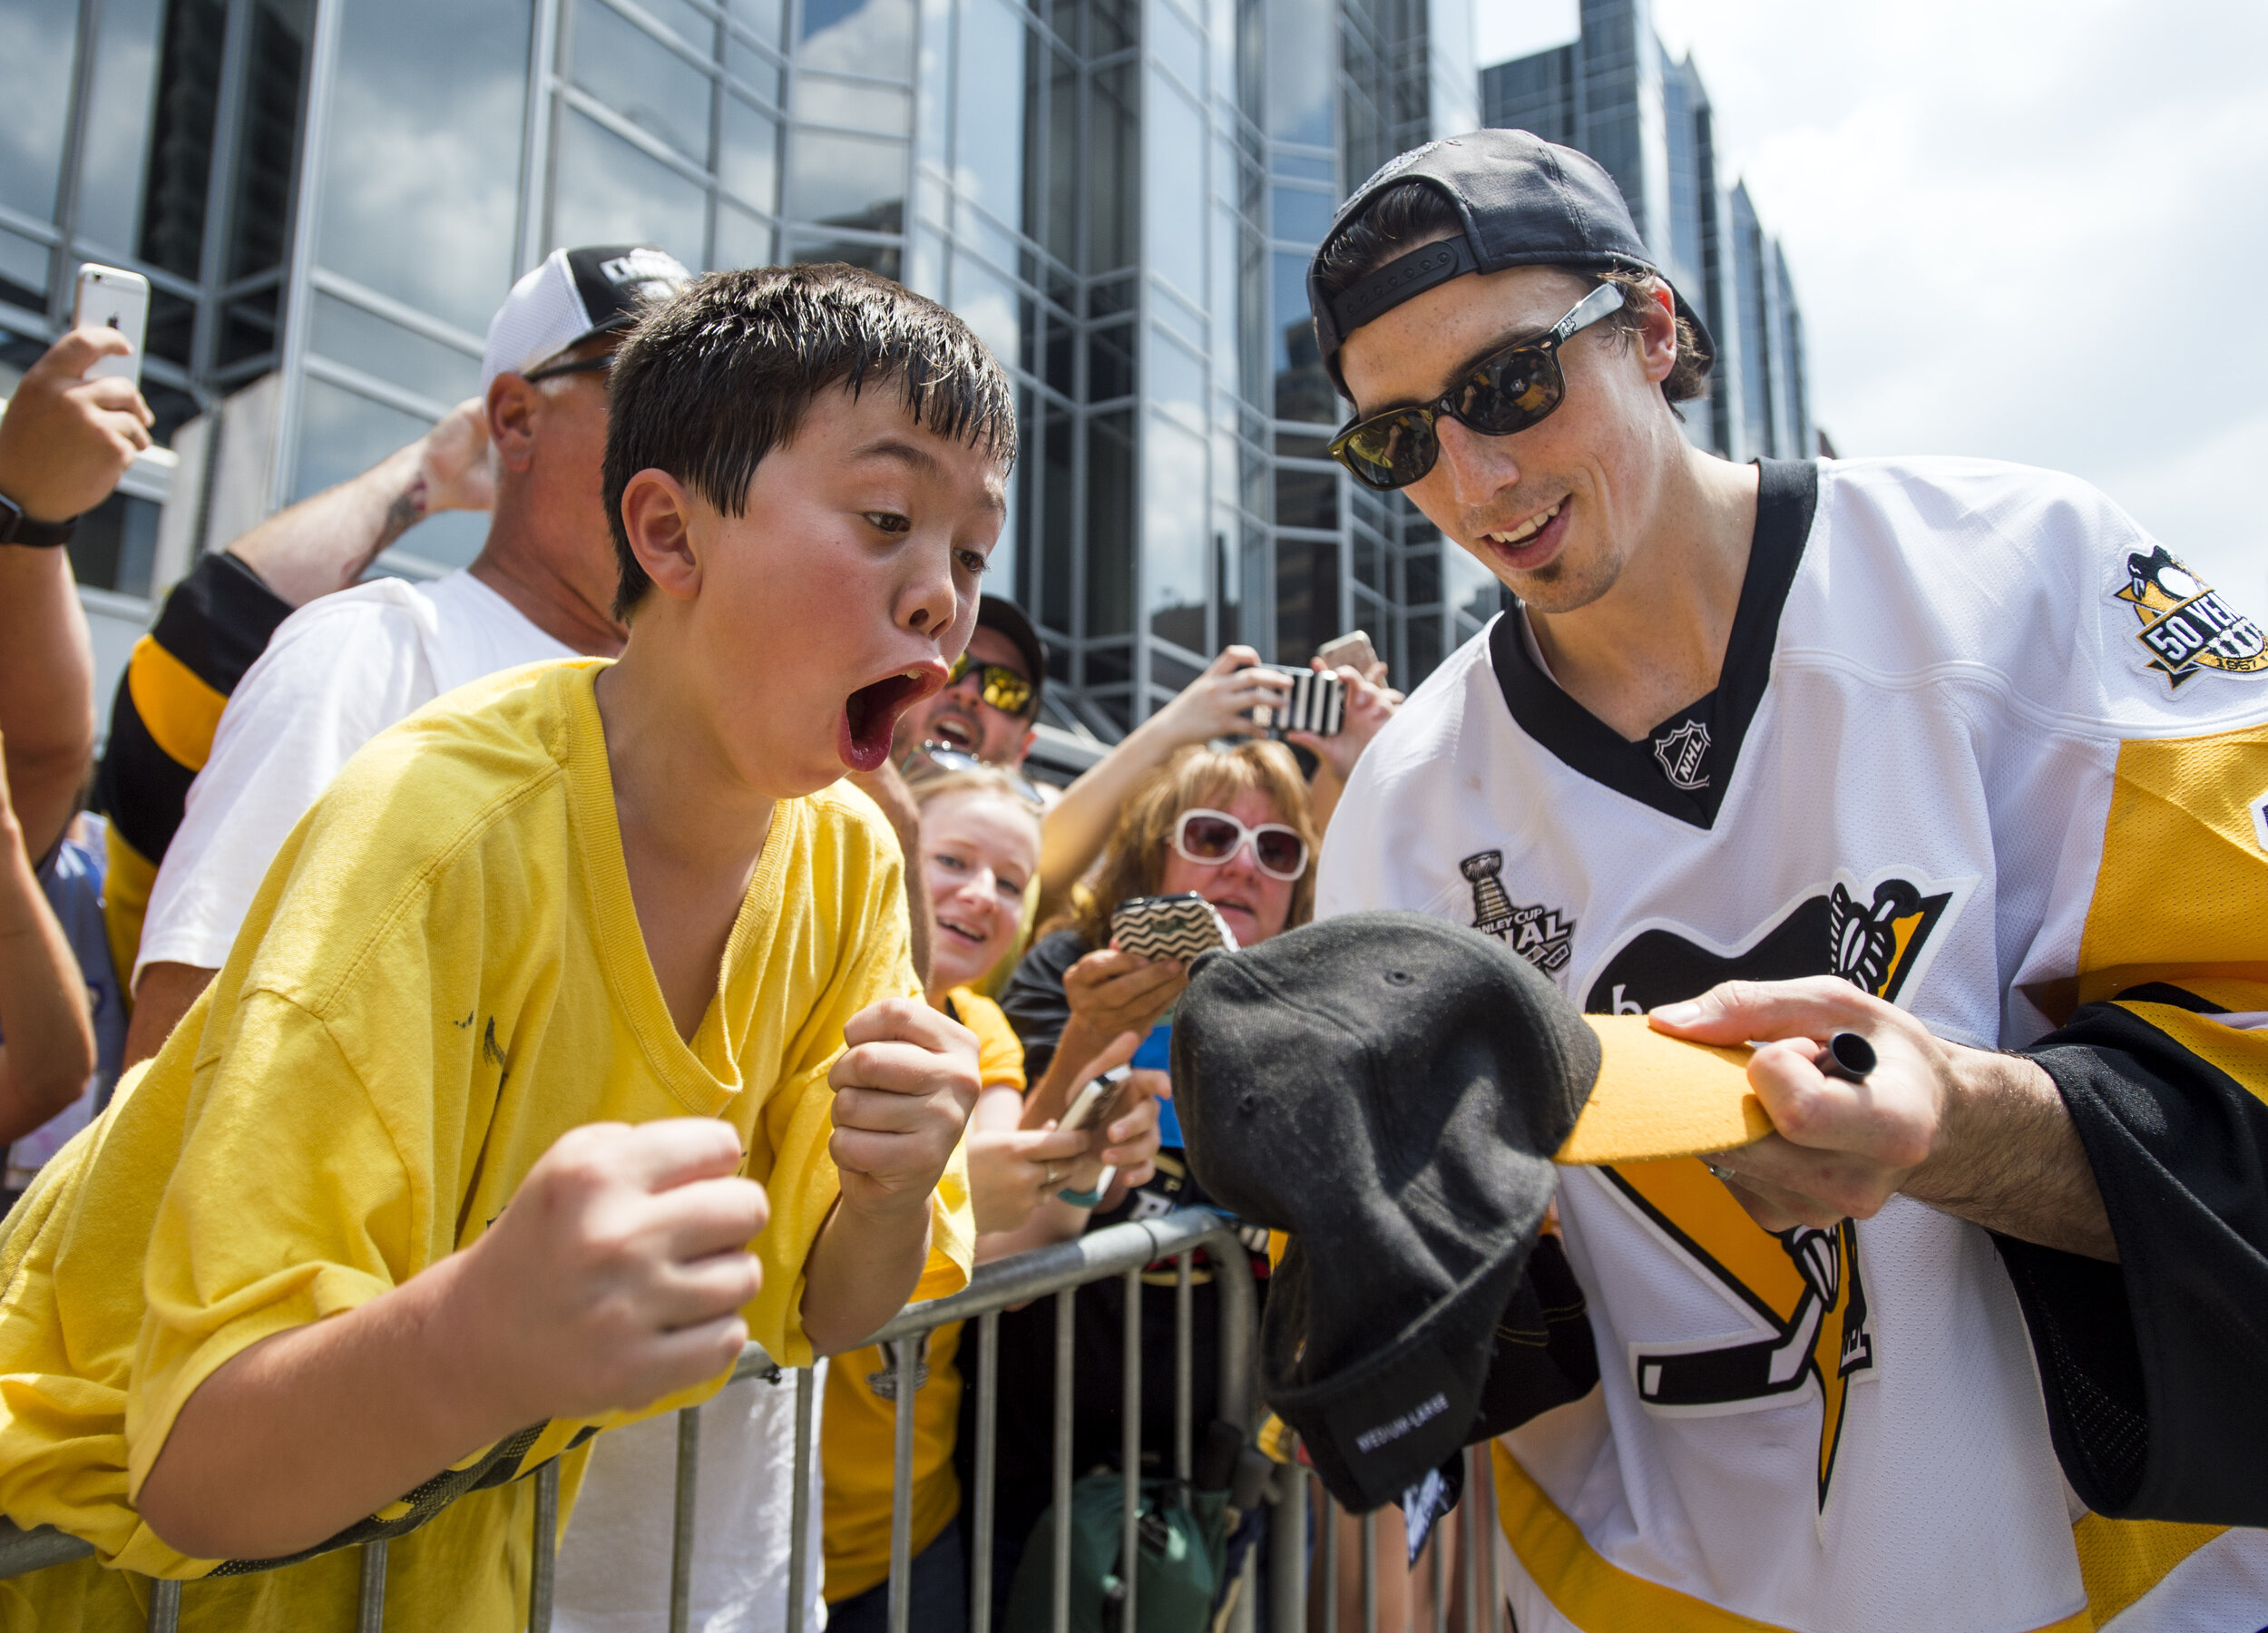  Pittsburgh Penguin Marc-Andre Fleury signs a hat for a young fan during the Pittsburgh Penguins victory parade on Wednesday, June 14, 2017 at Grant Street and Boulevard of the Allies.  